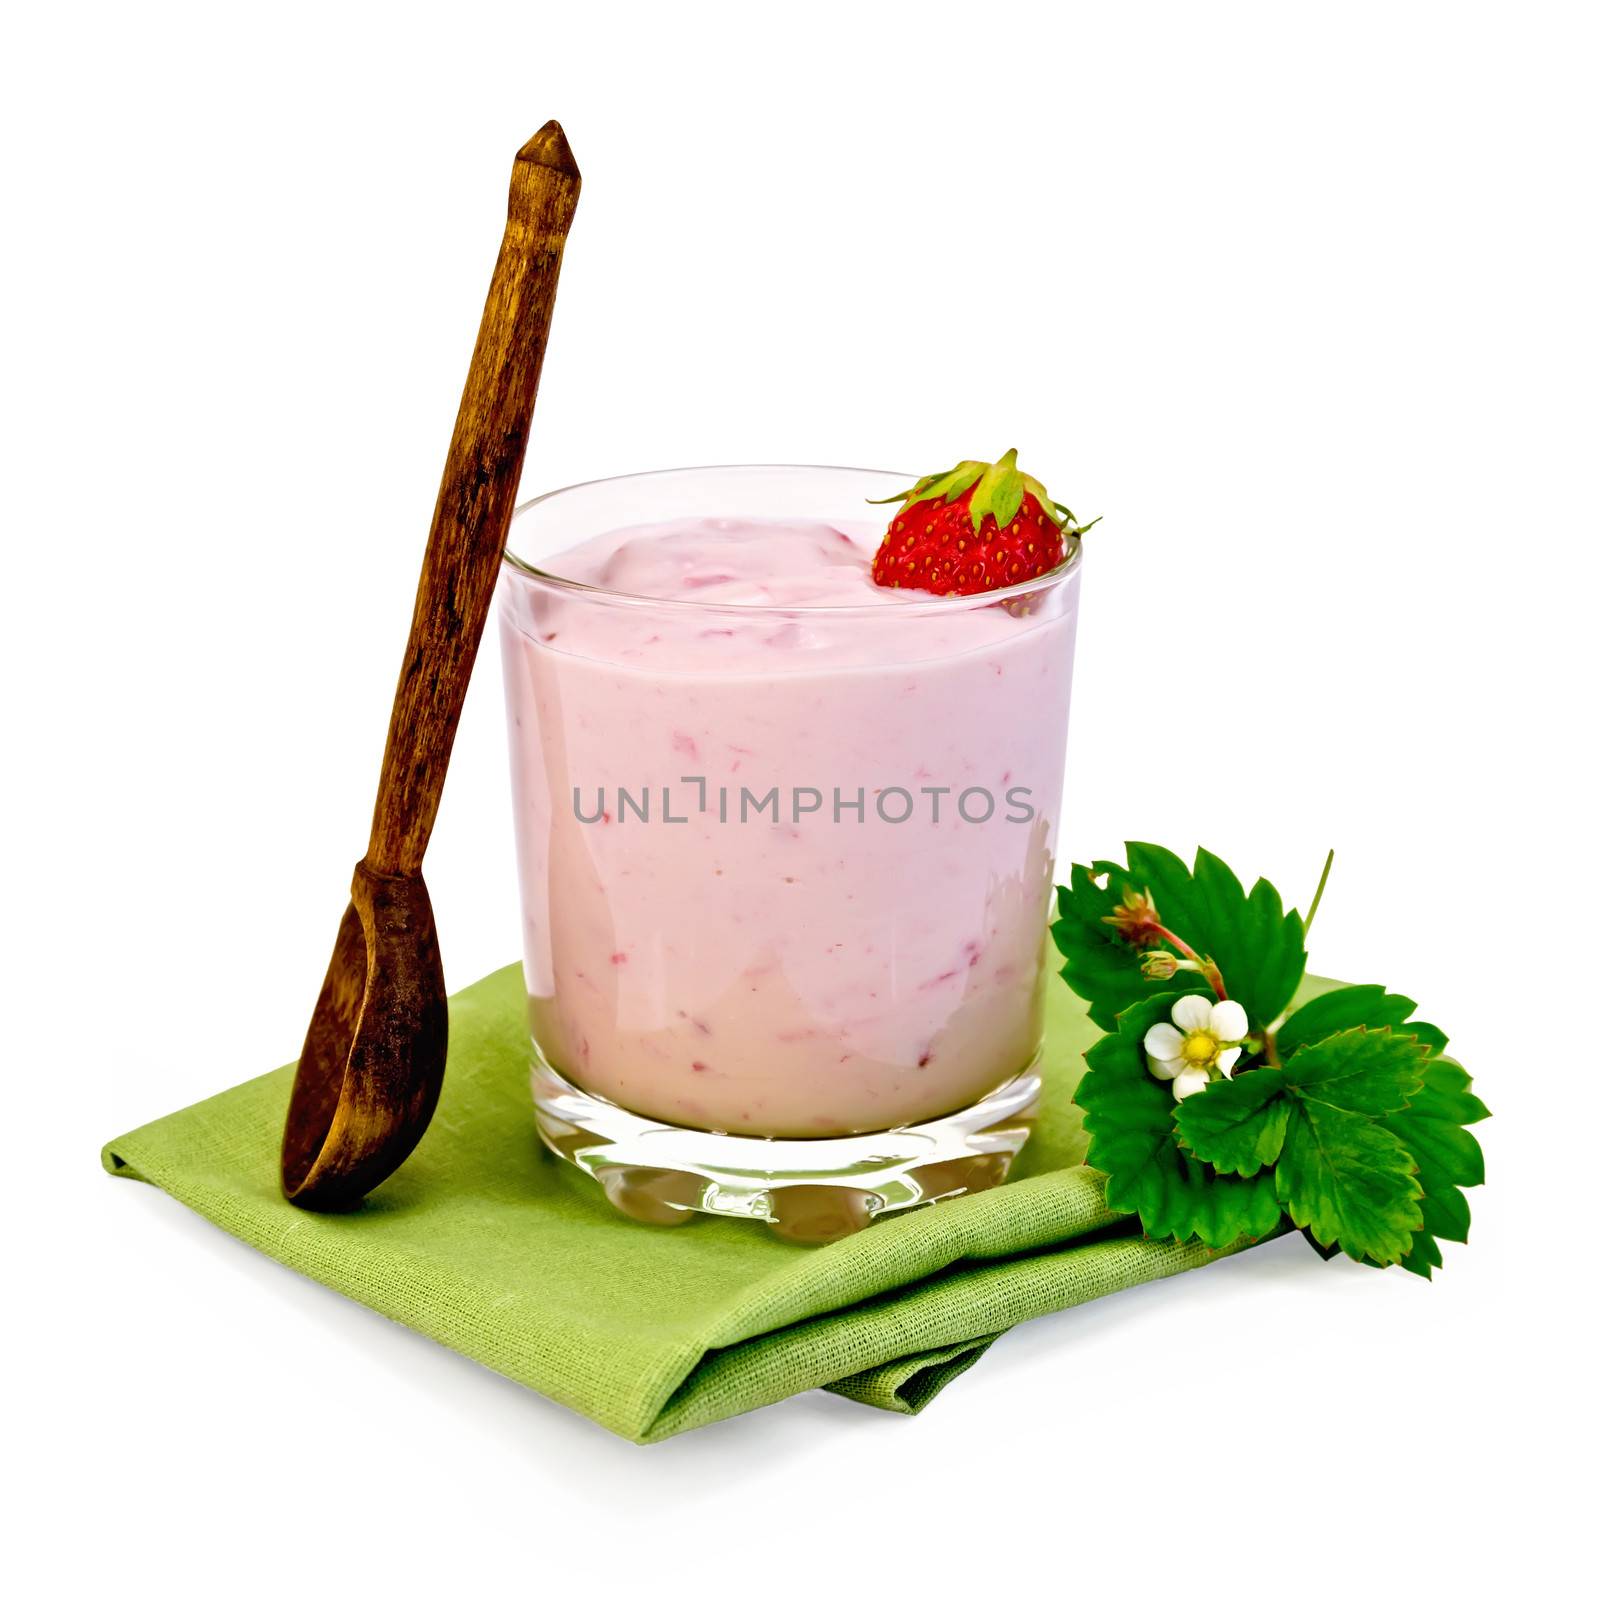 Milkshake with strawberries in a glass, wooden spoon, strawberry flower with leaves on a napkin isolated on white background